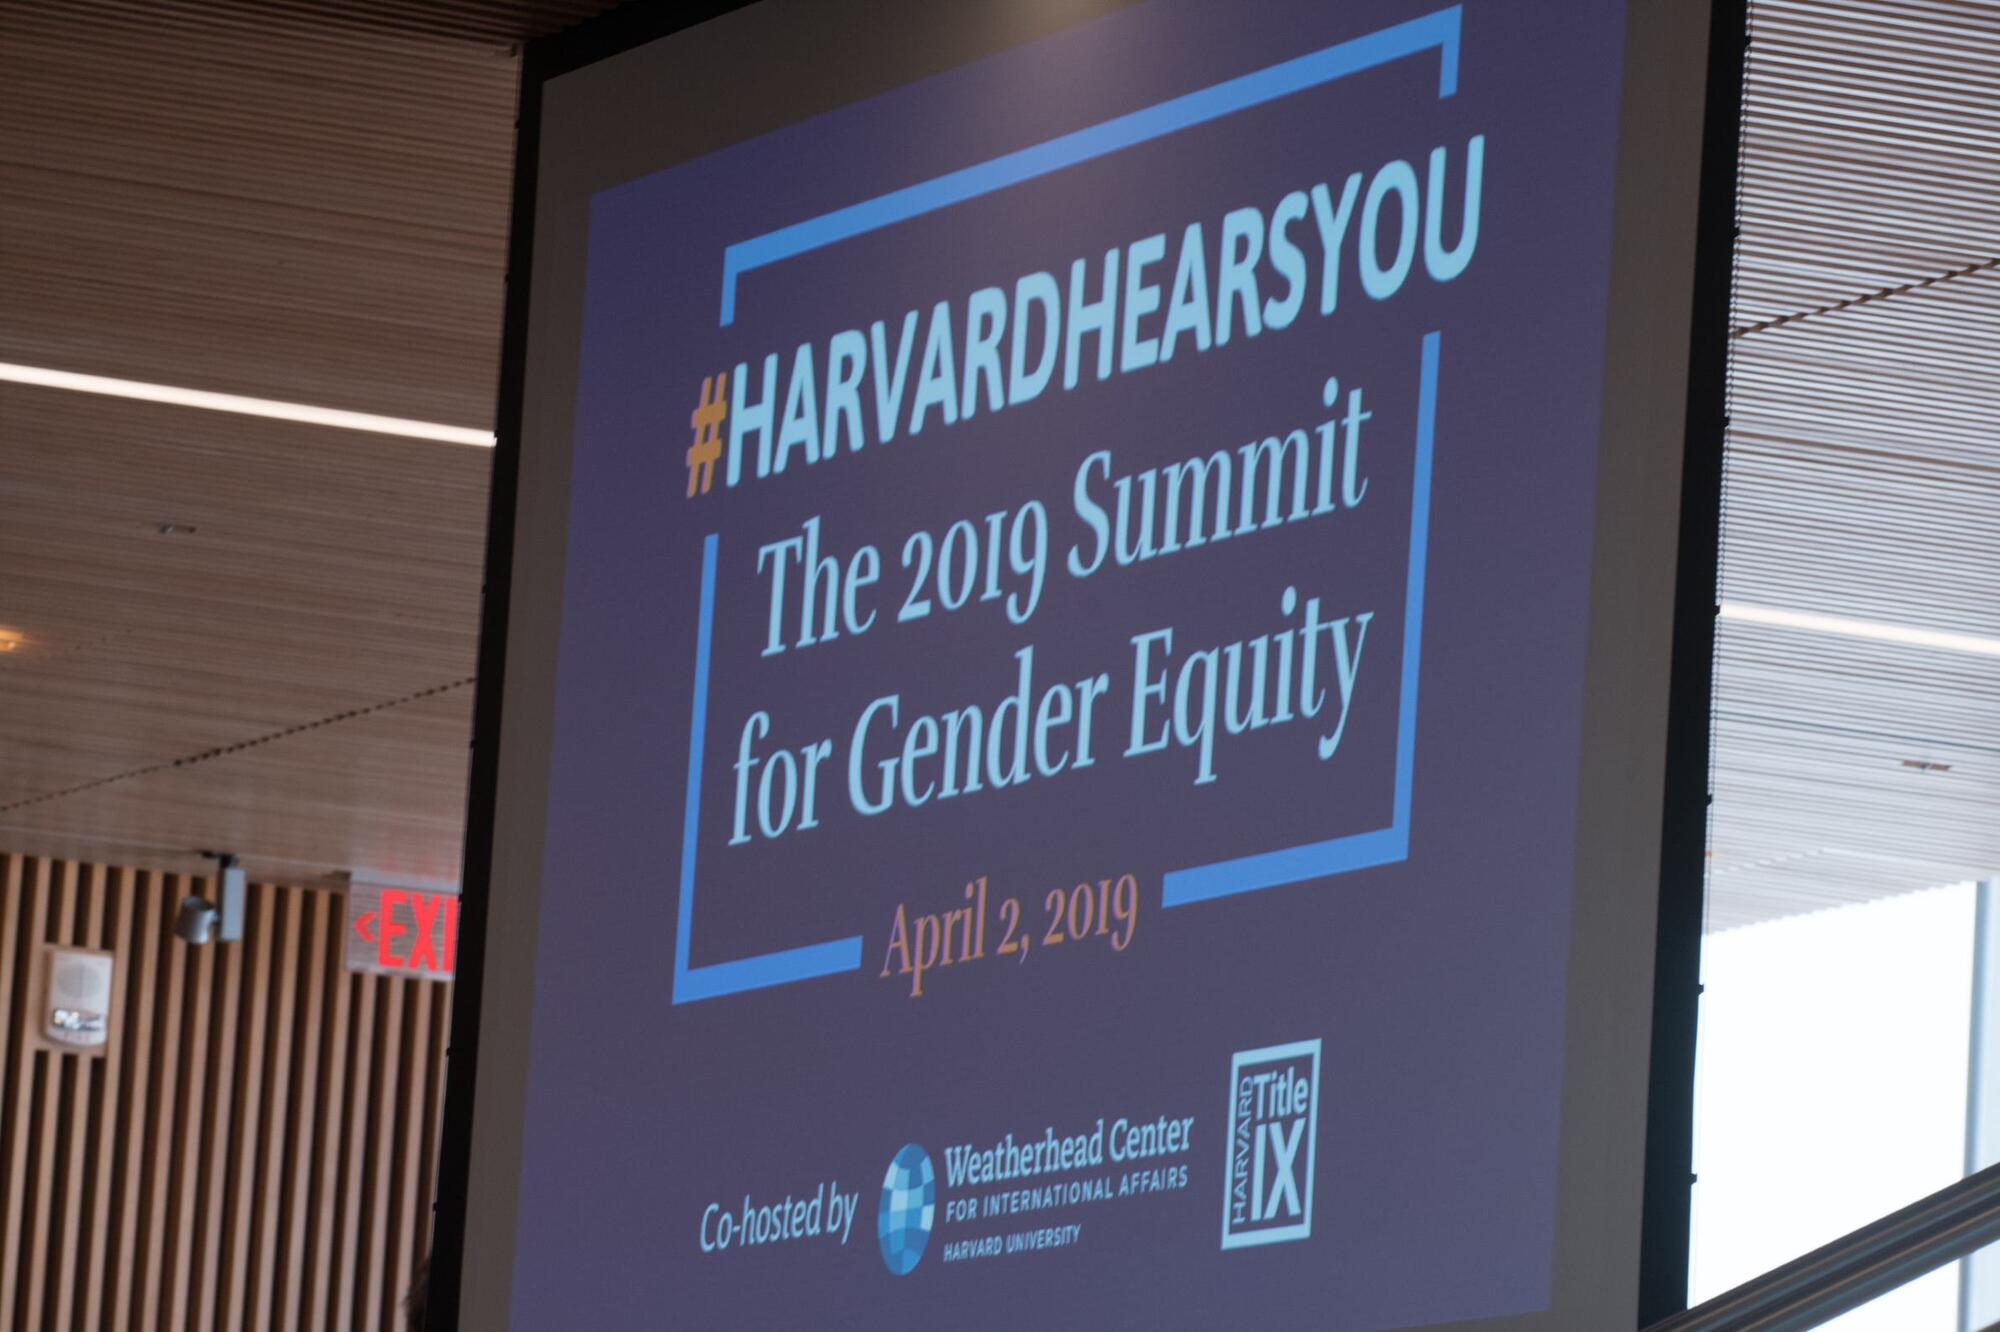 A presentation slide featuring the name and date of the 2019 Summit for Gender Equity